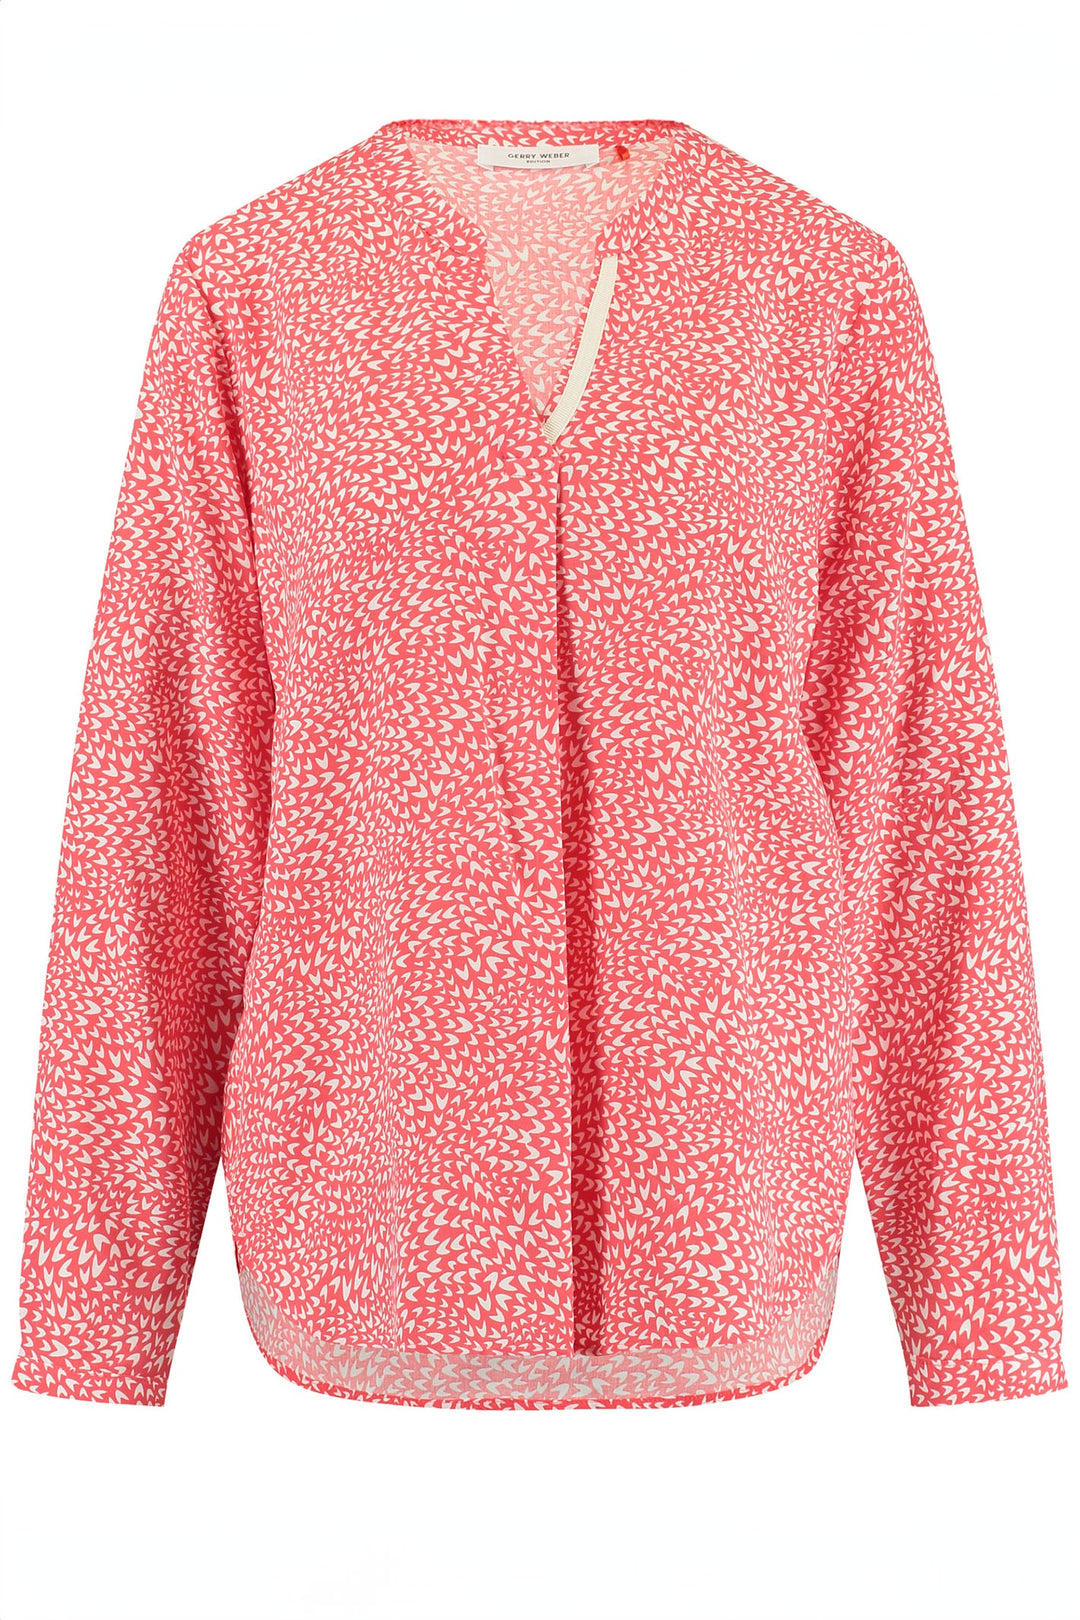 Gerry Weber 965046-66407 Red Coral Print Split Neck Blouse - Dotique Chesterfield